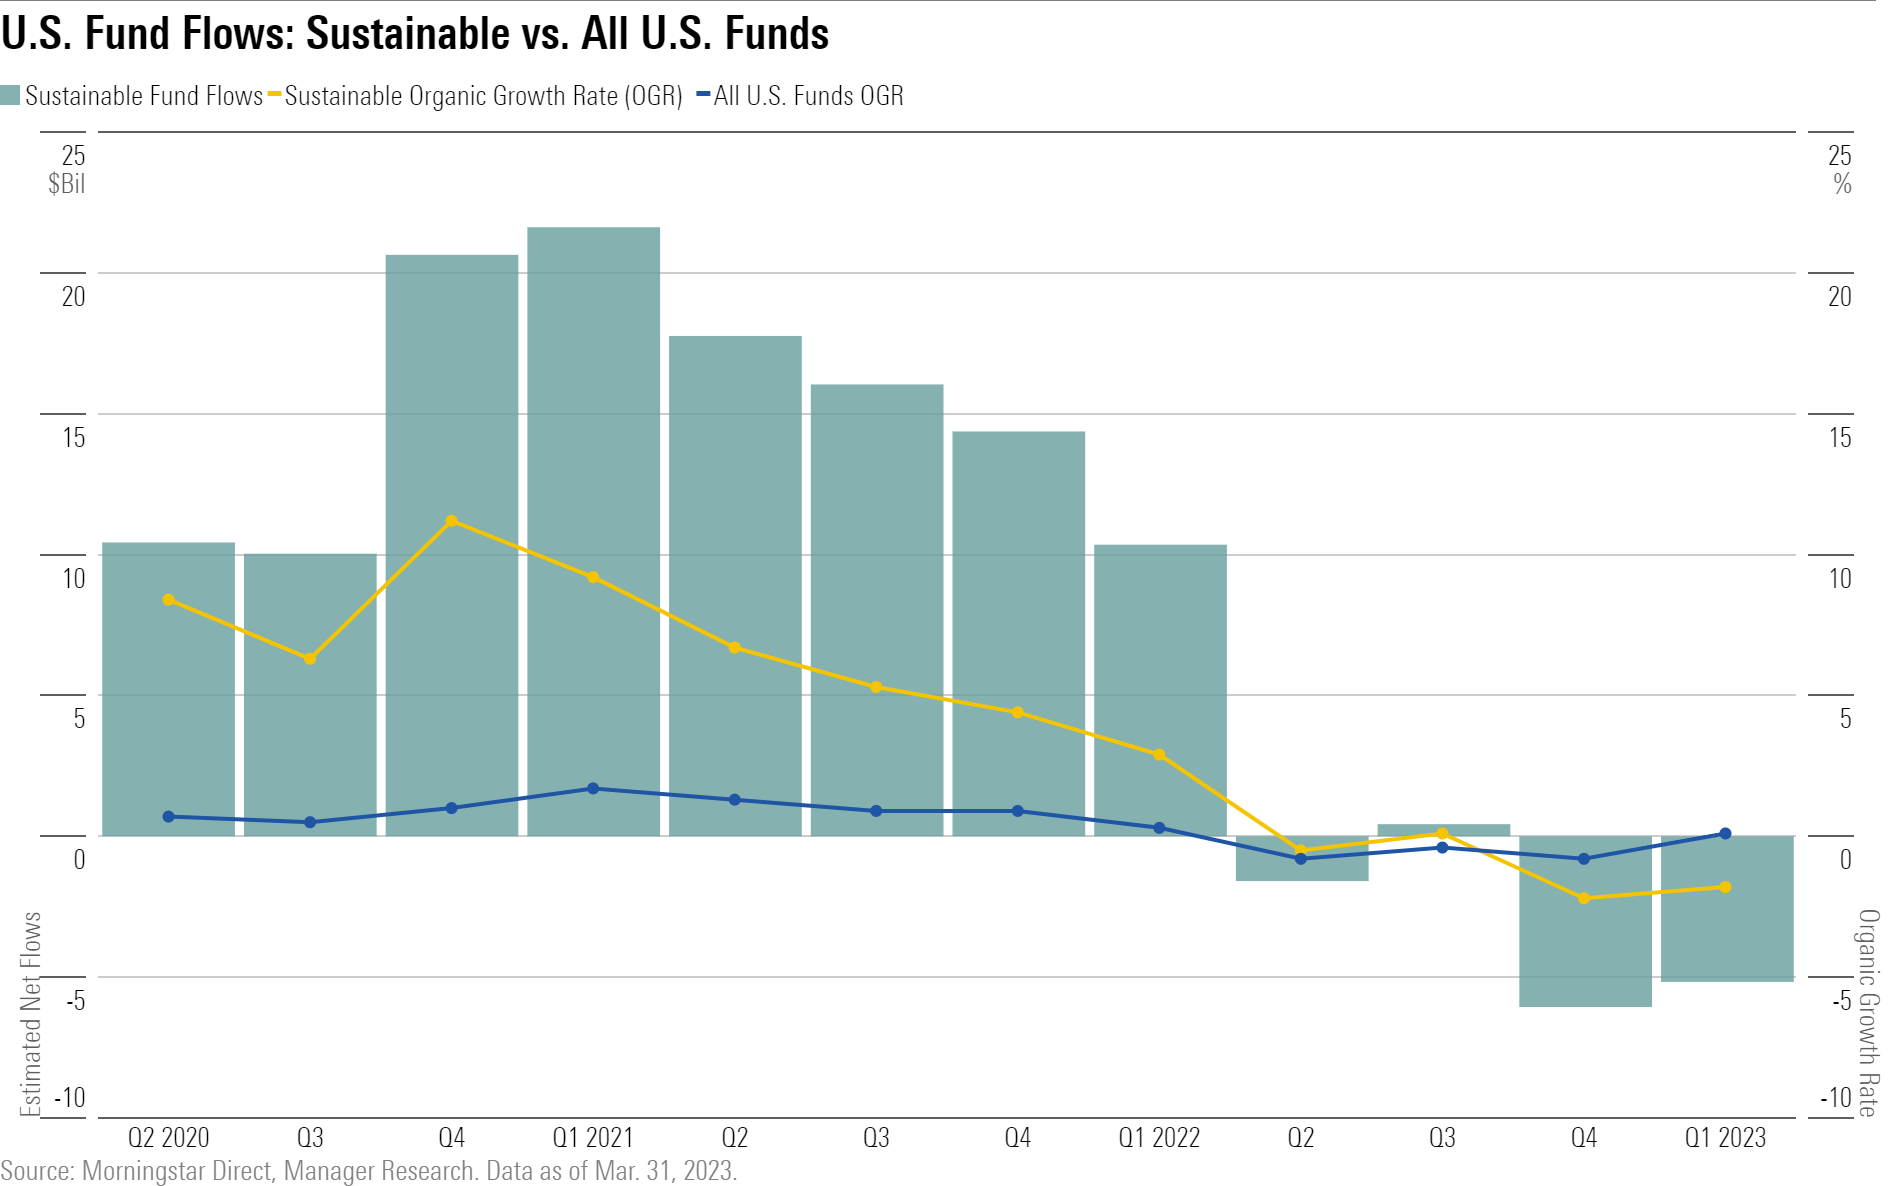 U.S. Sustainable Fund Flows Contract Again in 2023’s First Quarter